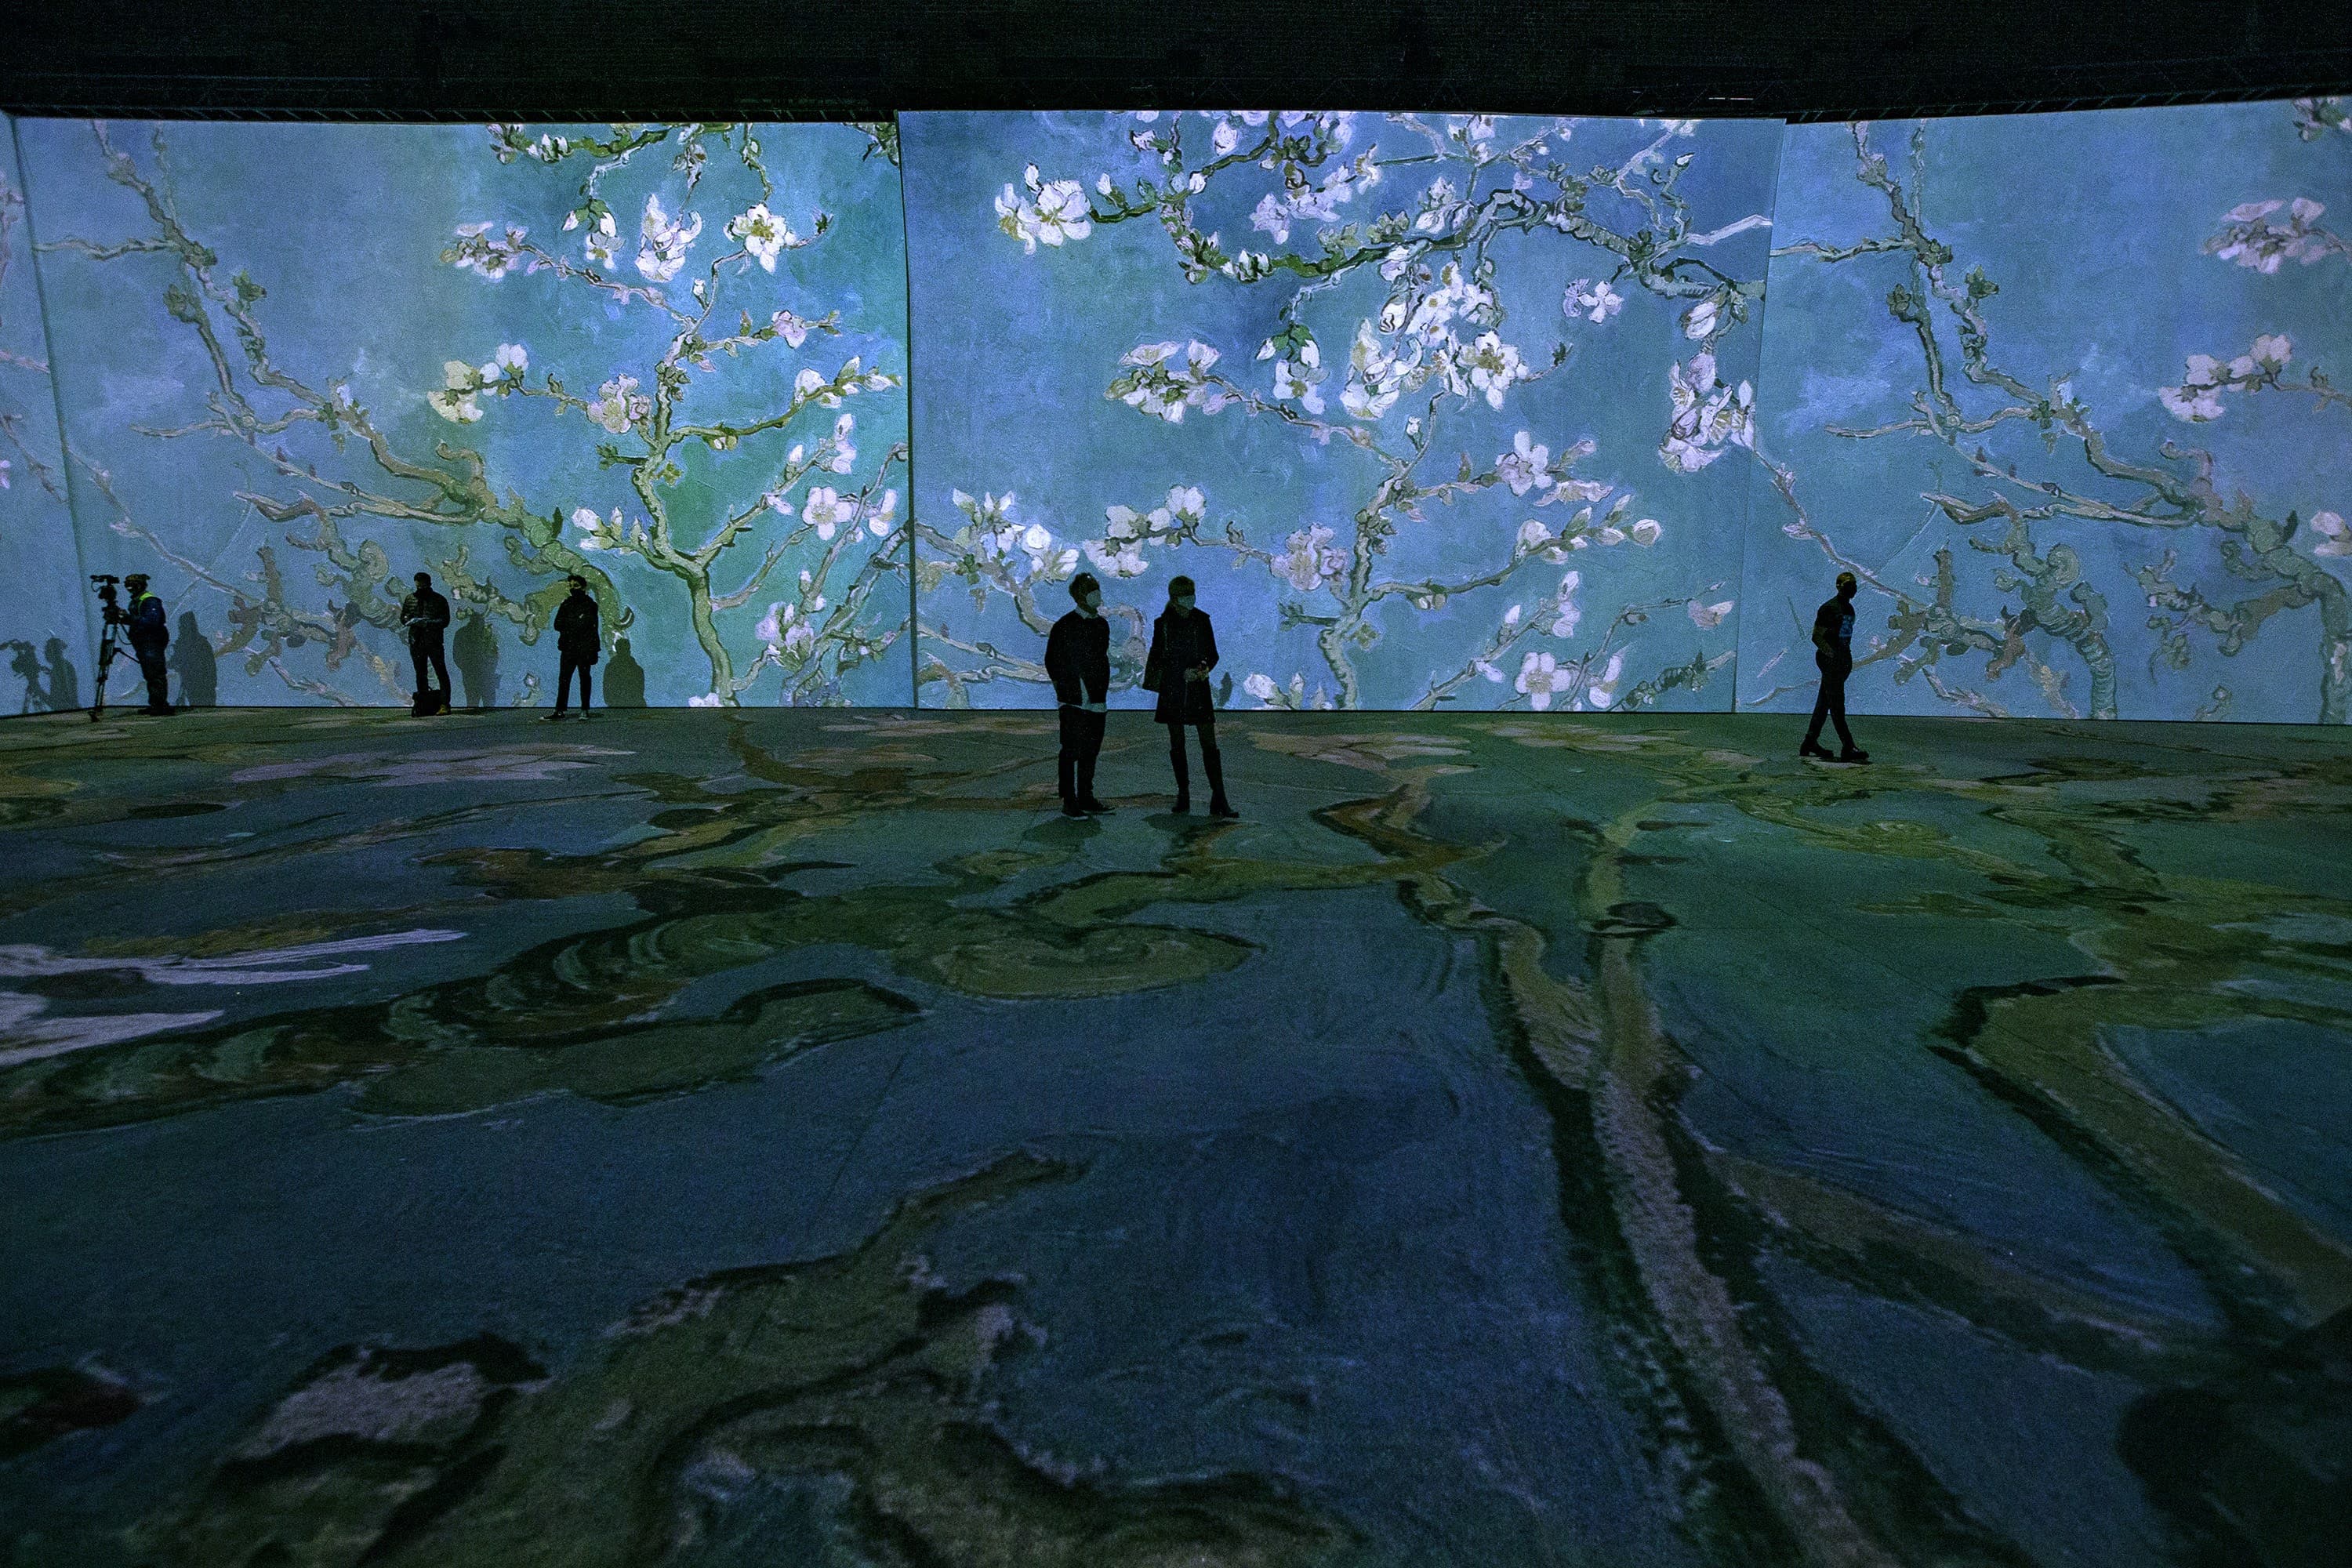 Van Gogh’s “Almond Blossom” is projected onto the walls during a press preview of “Imagine Van Gogh” at the SoWa Power Station in the South End. (Jesse Costa/WBUR)